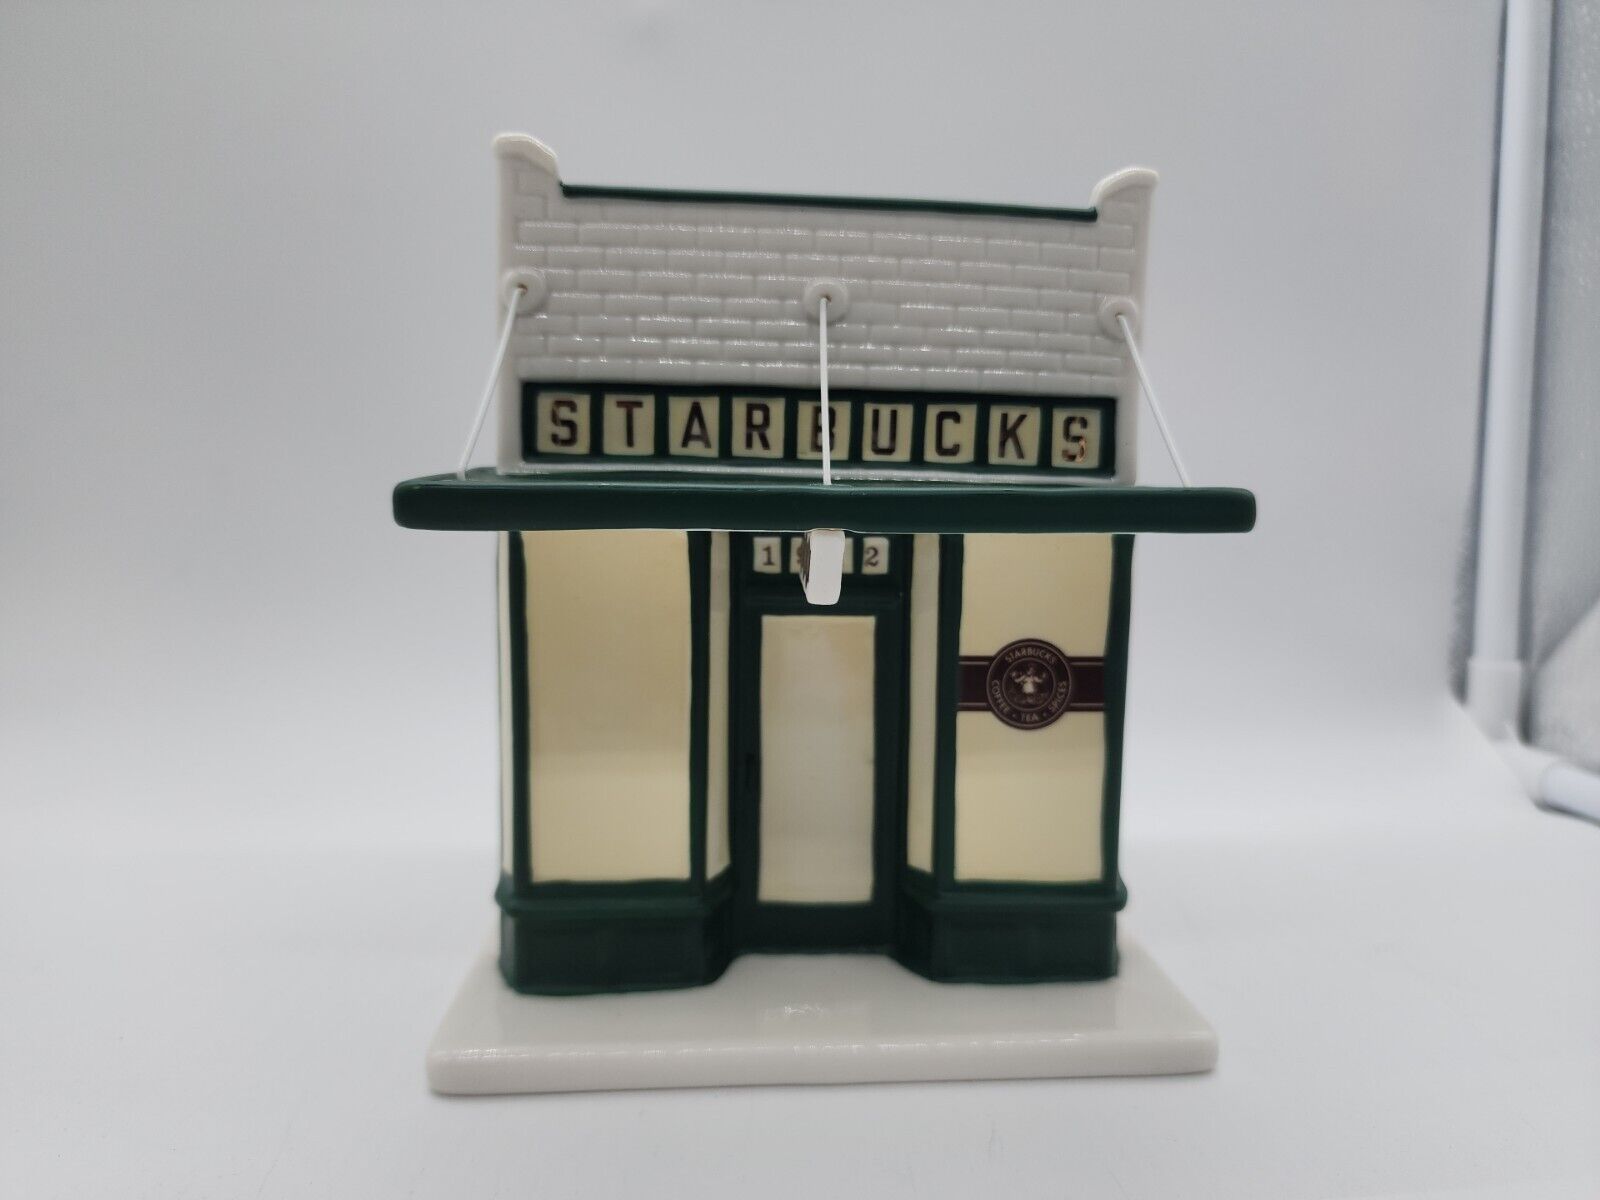 2016 Starbucks Pike Place Storefront ceramic Collectable 1971 original store